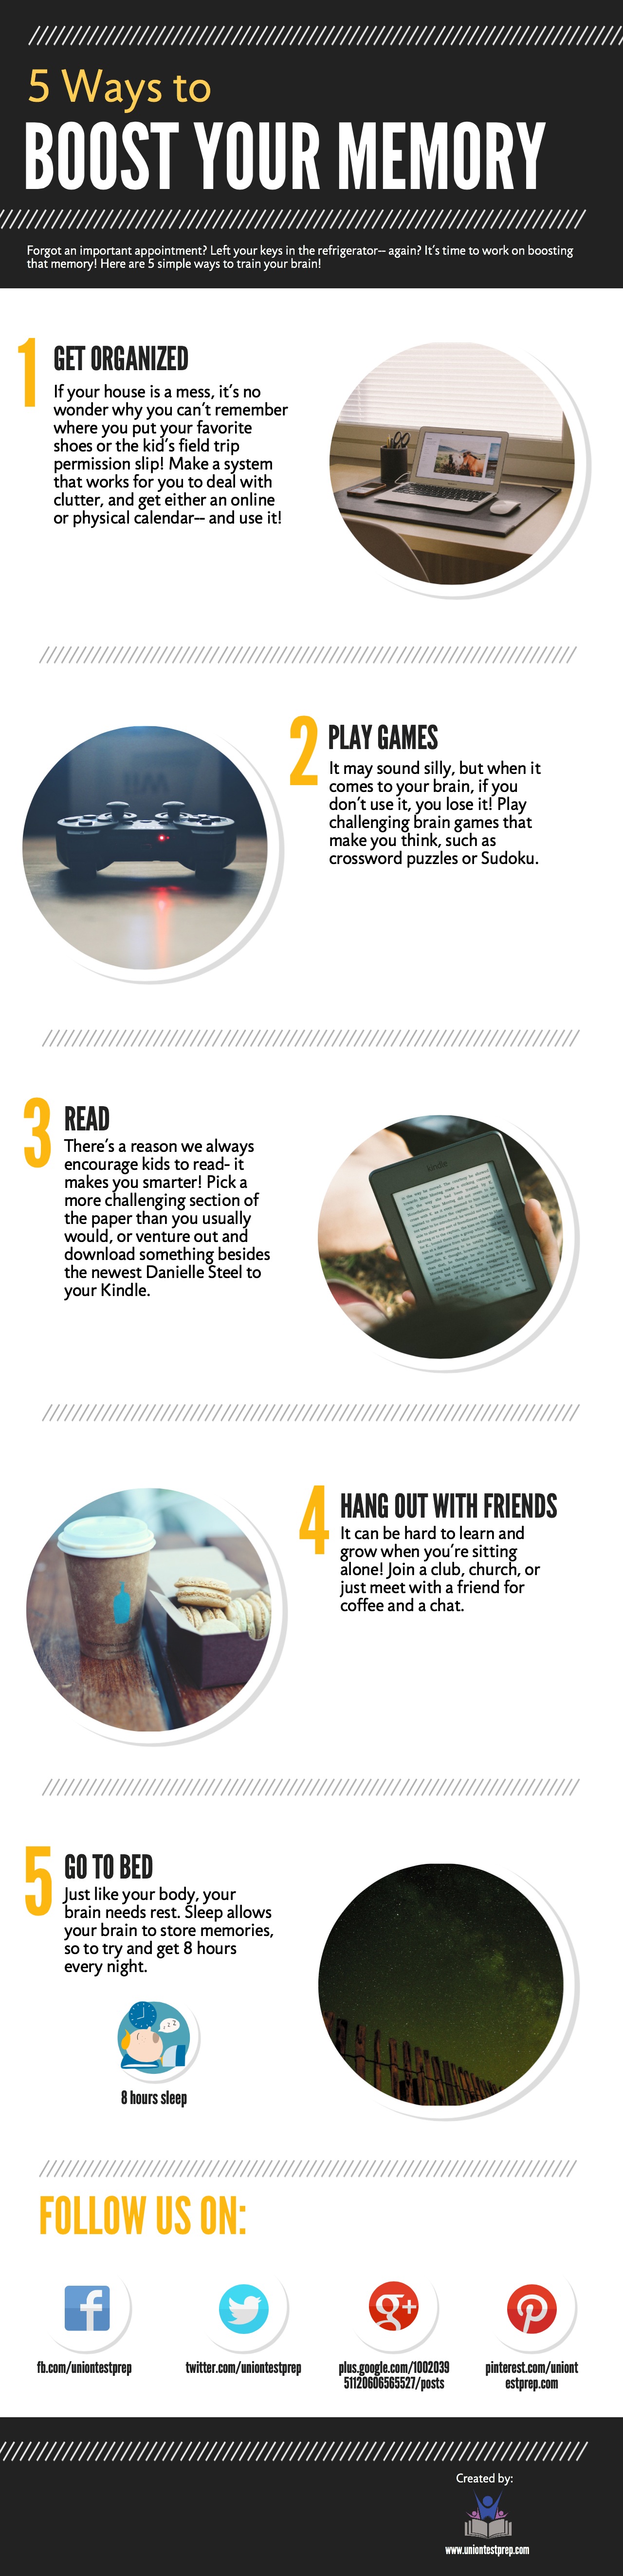 Tips to boost your memory